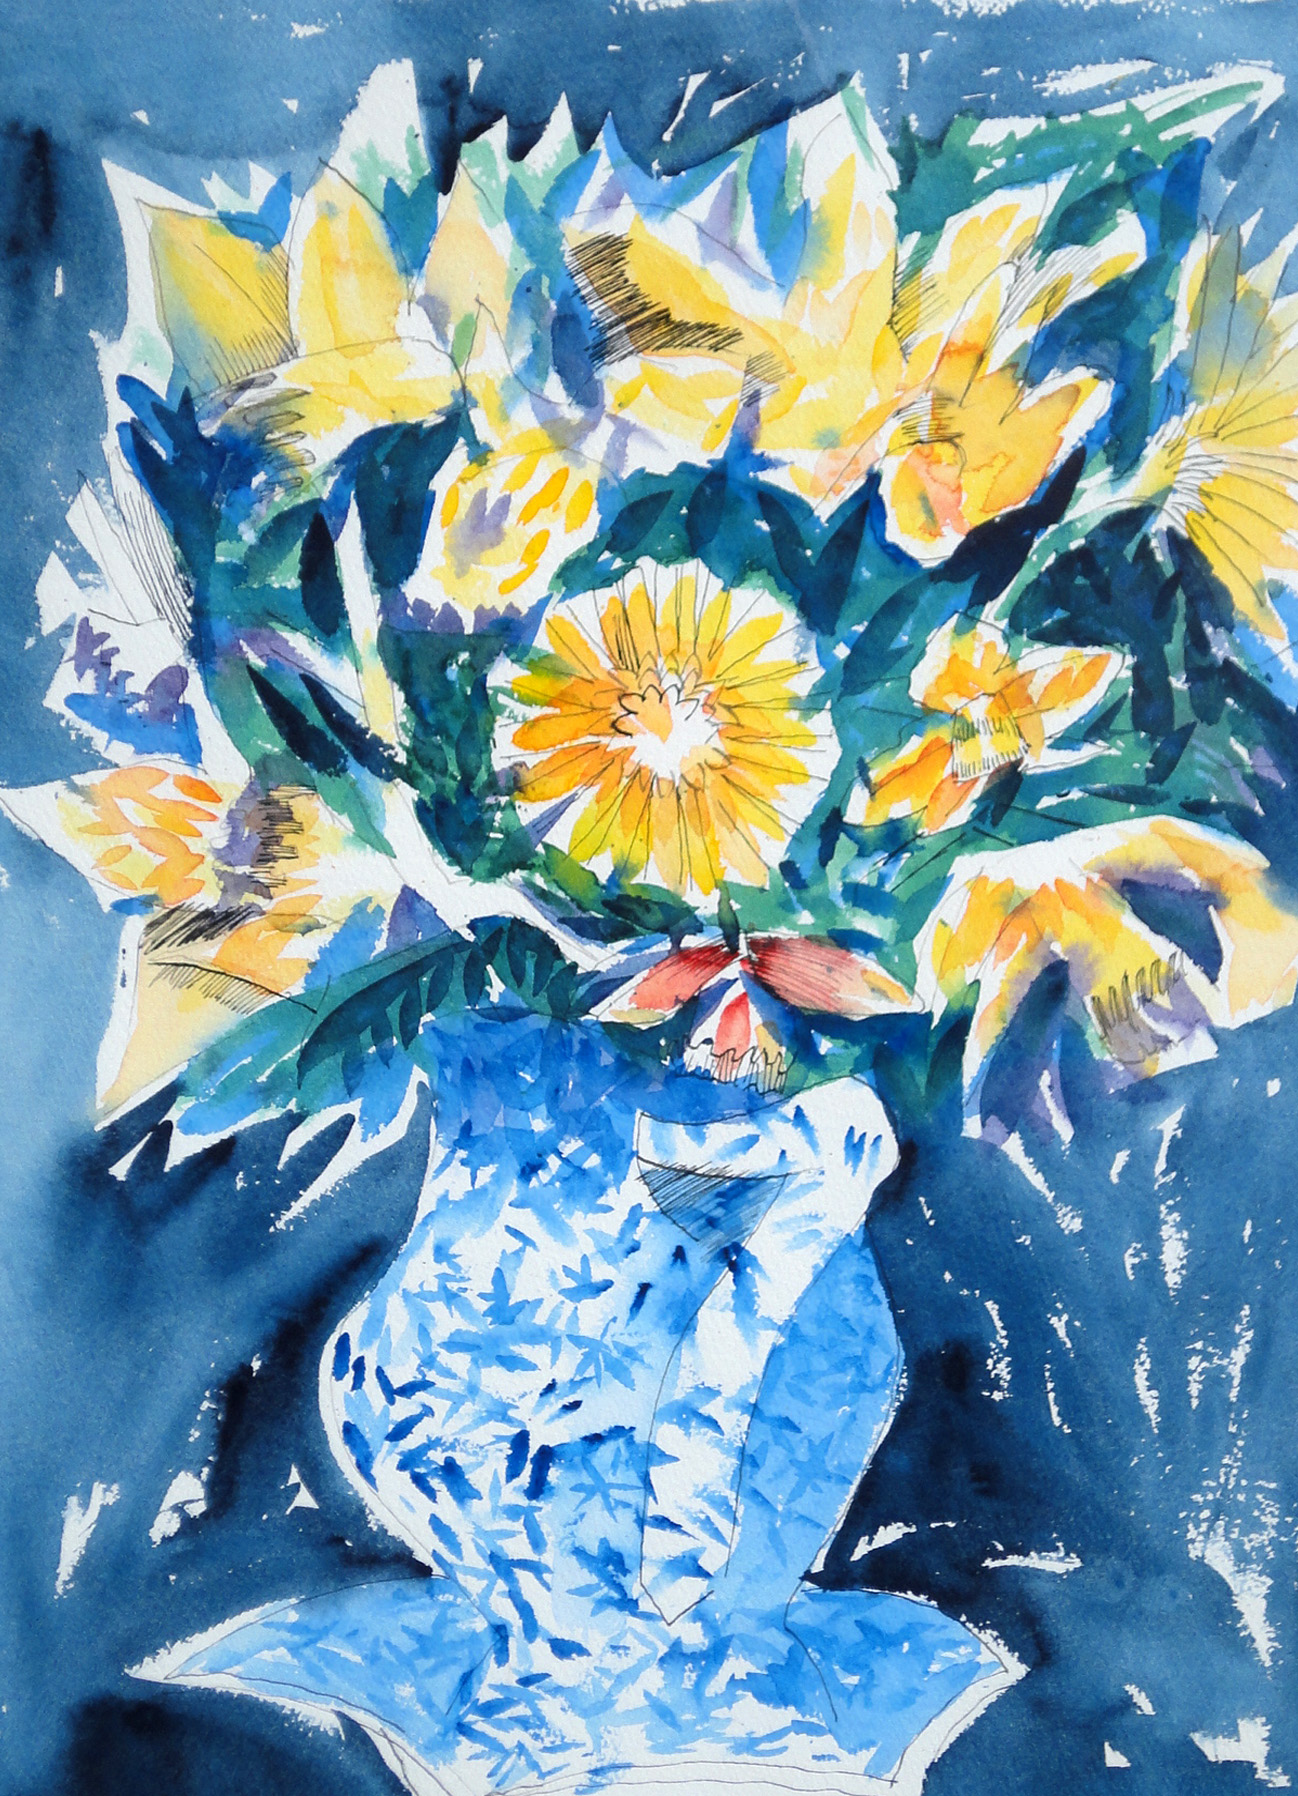 Charles Blackman 'Bouquet' watercolour and ink on paper 60 x 48cm dated 30.8.89 $15,000